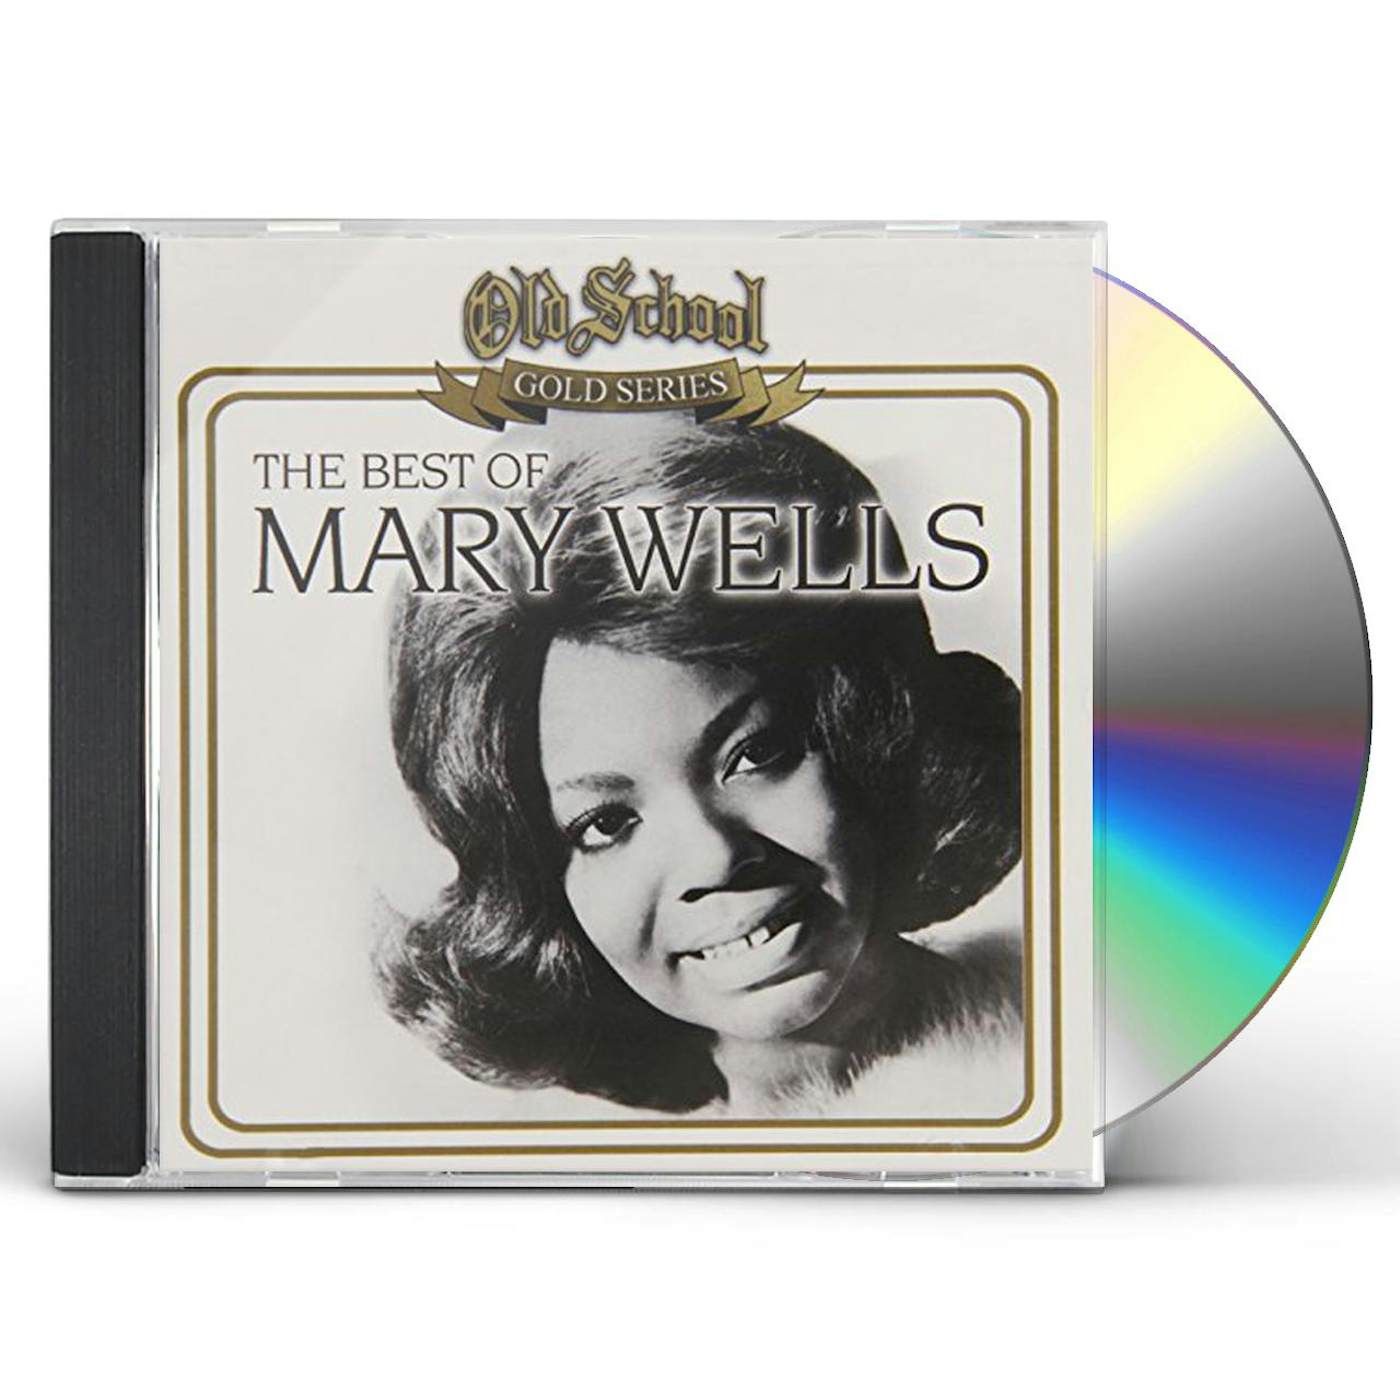 Mary Wells OLD SCHOOL GOLD SERIES CD